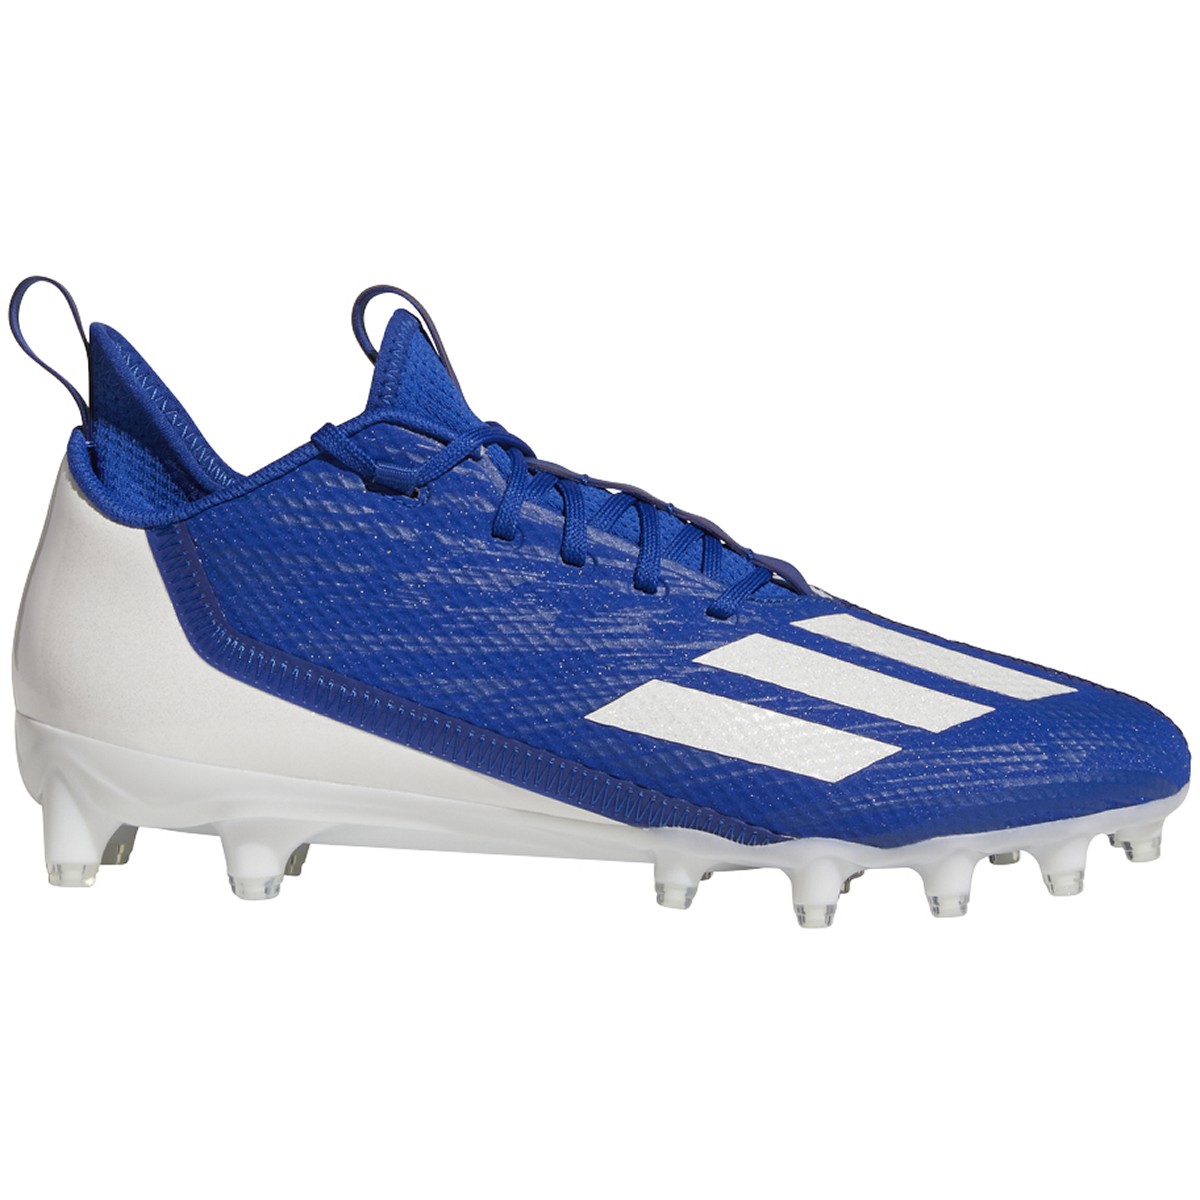 The Review of the Adidas Adizero Scorch Football Cleats - A Great ...